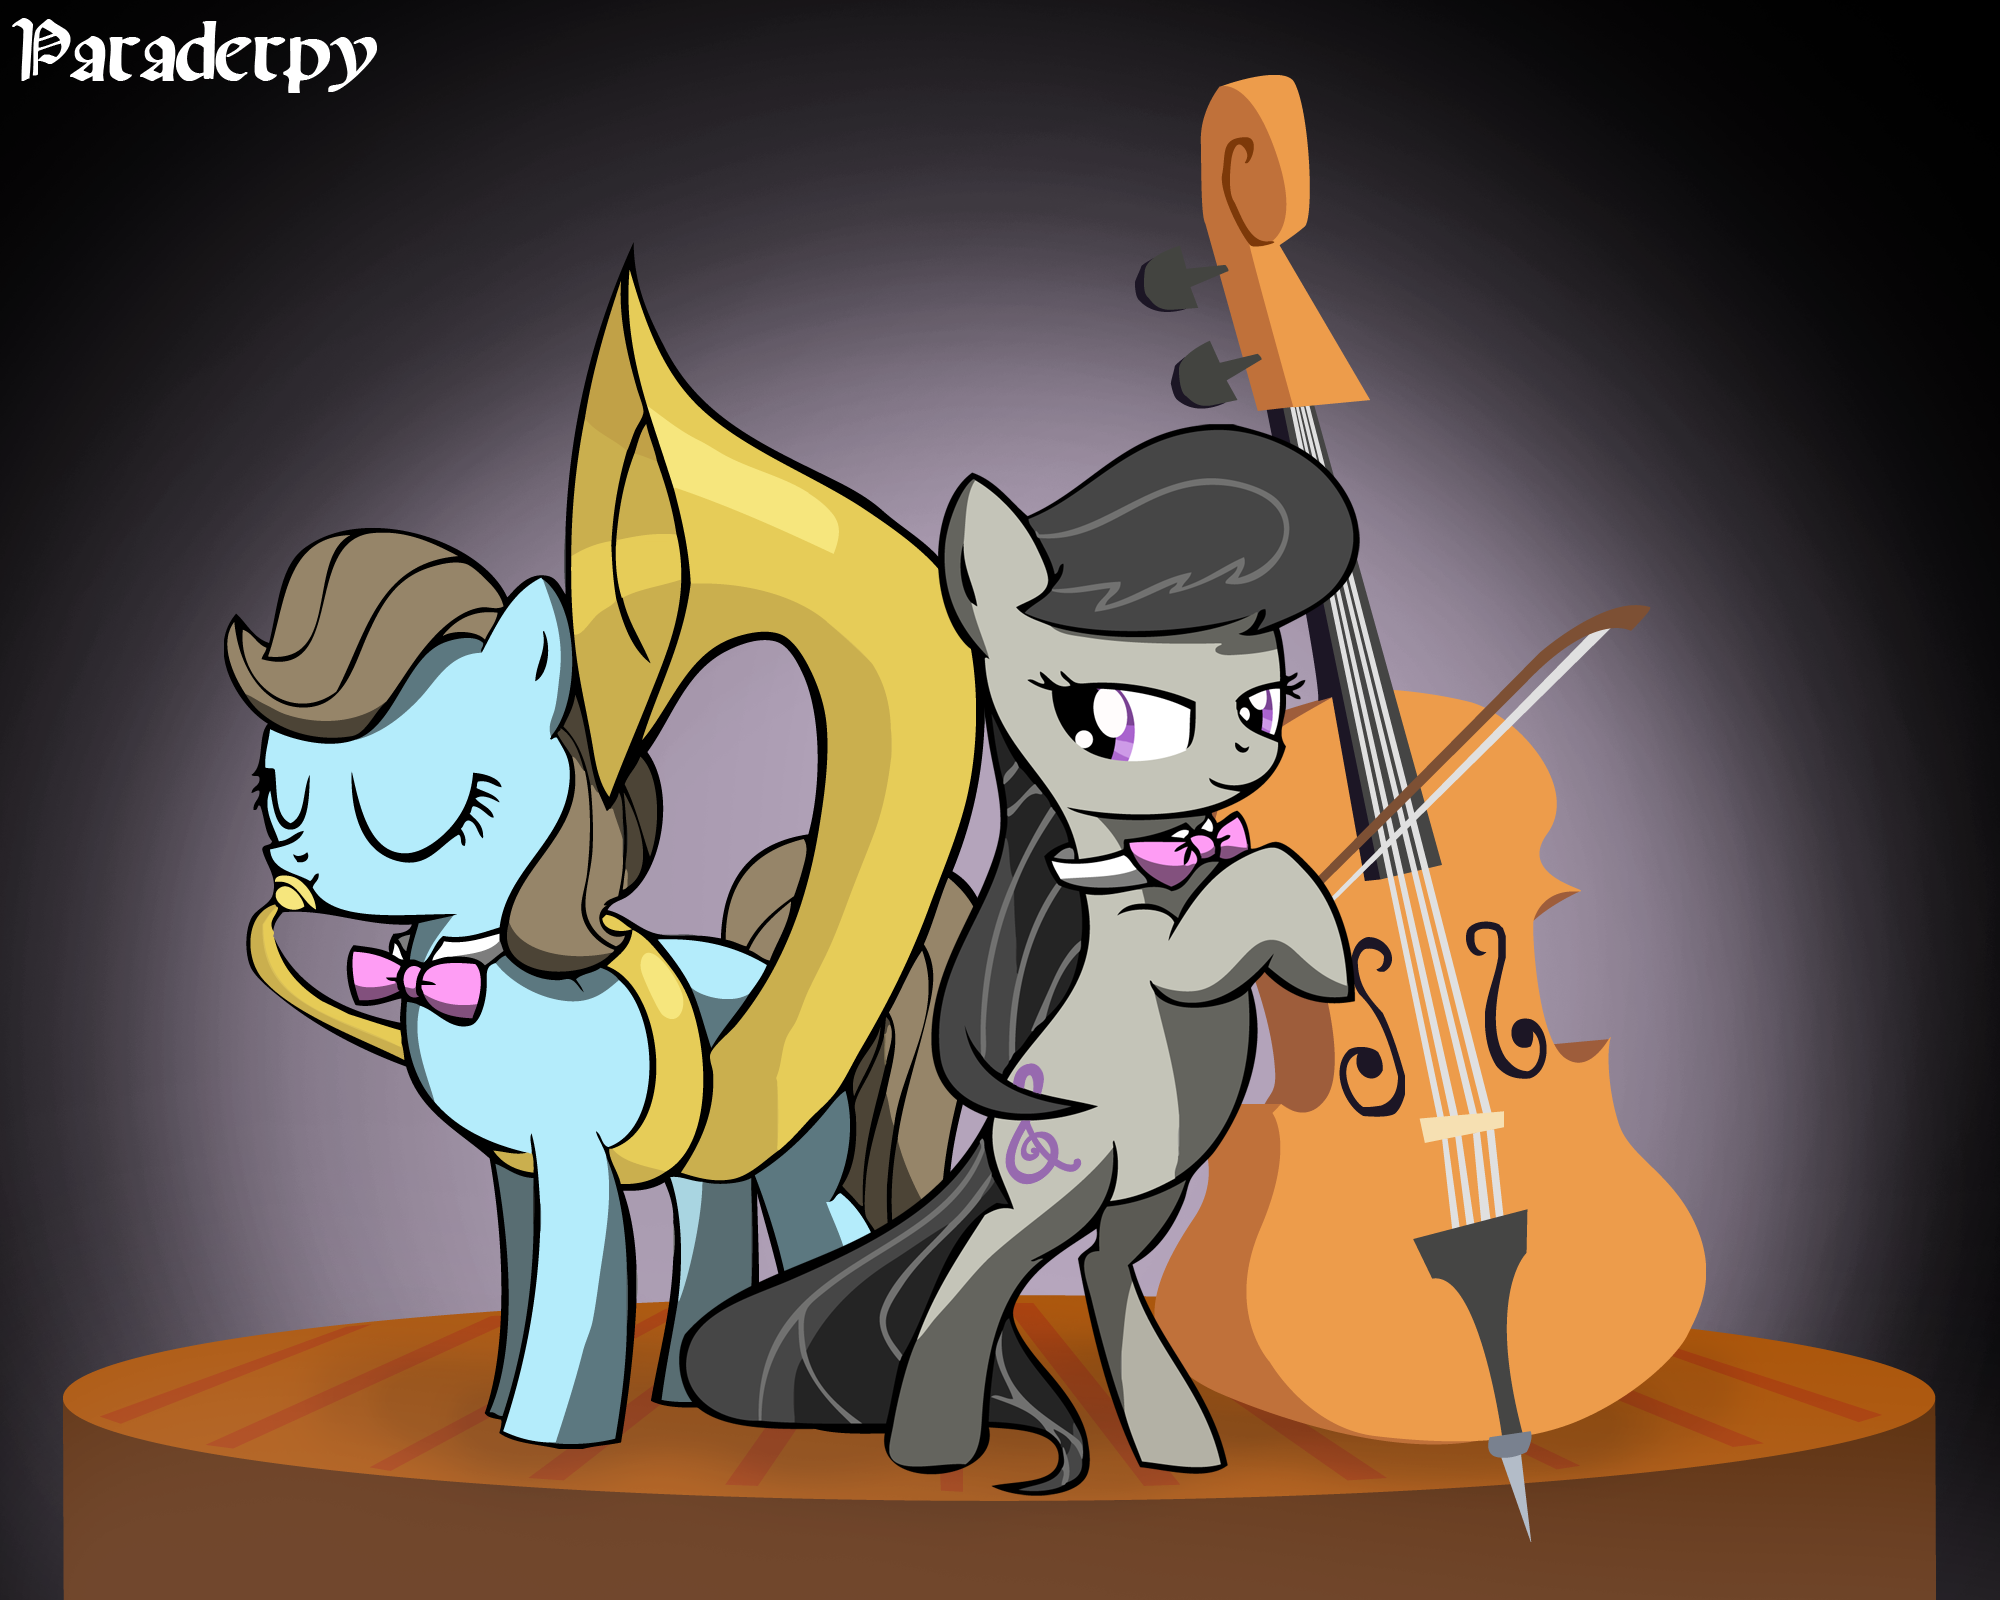 The Duet by Paraderpy